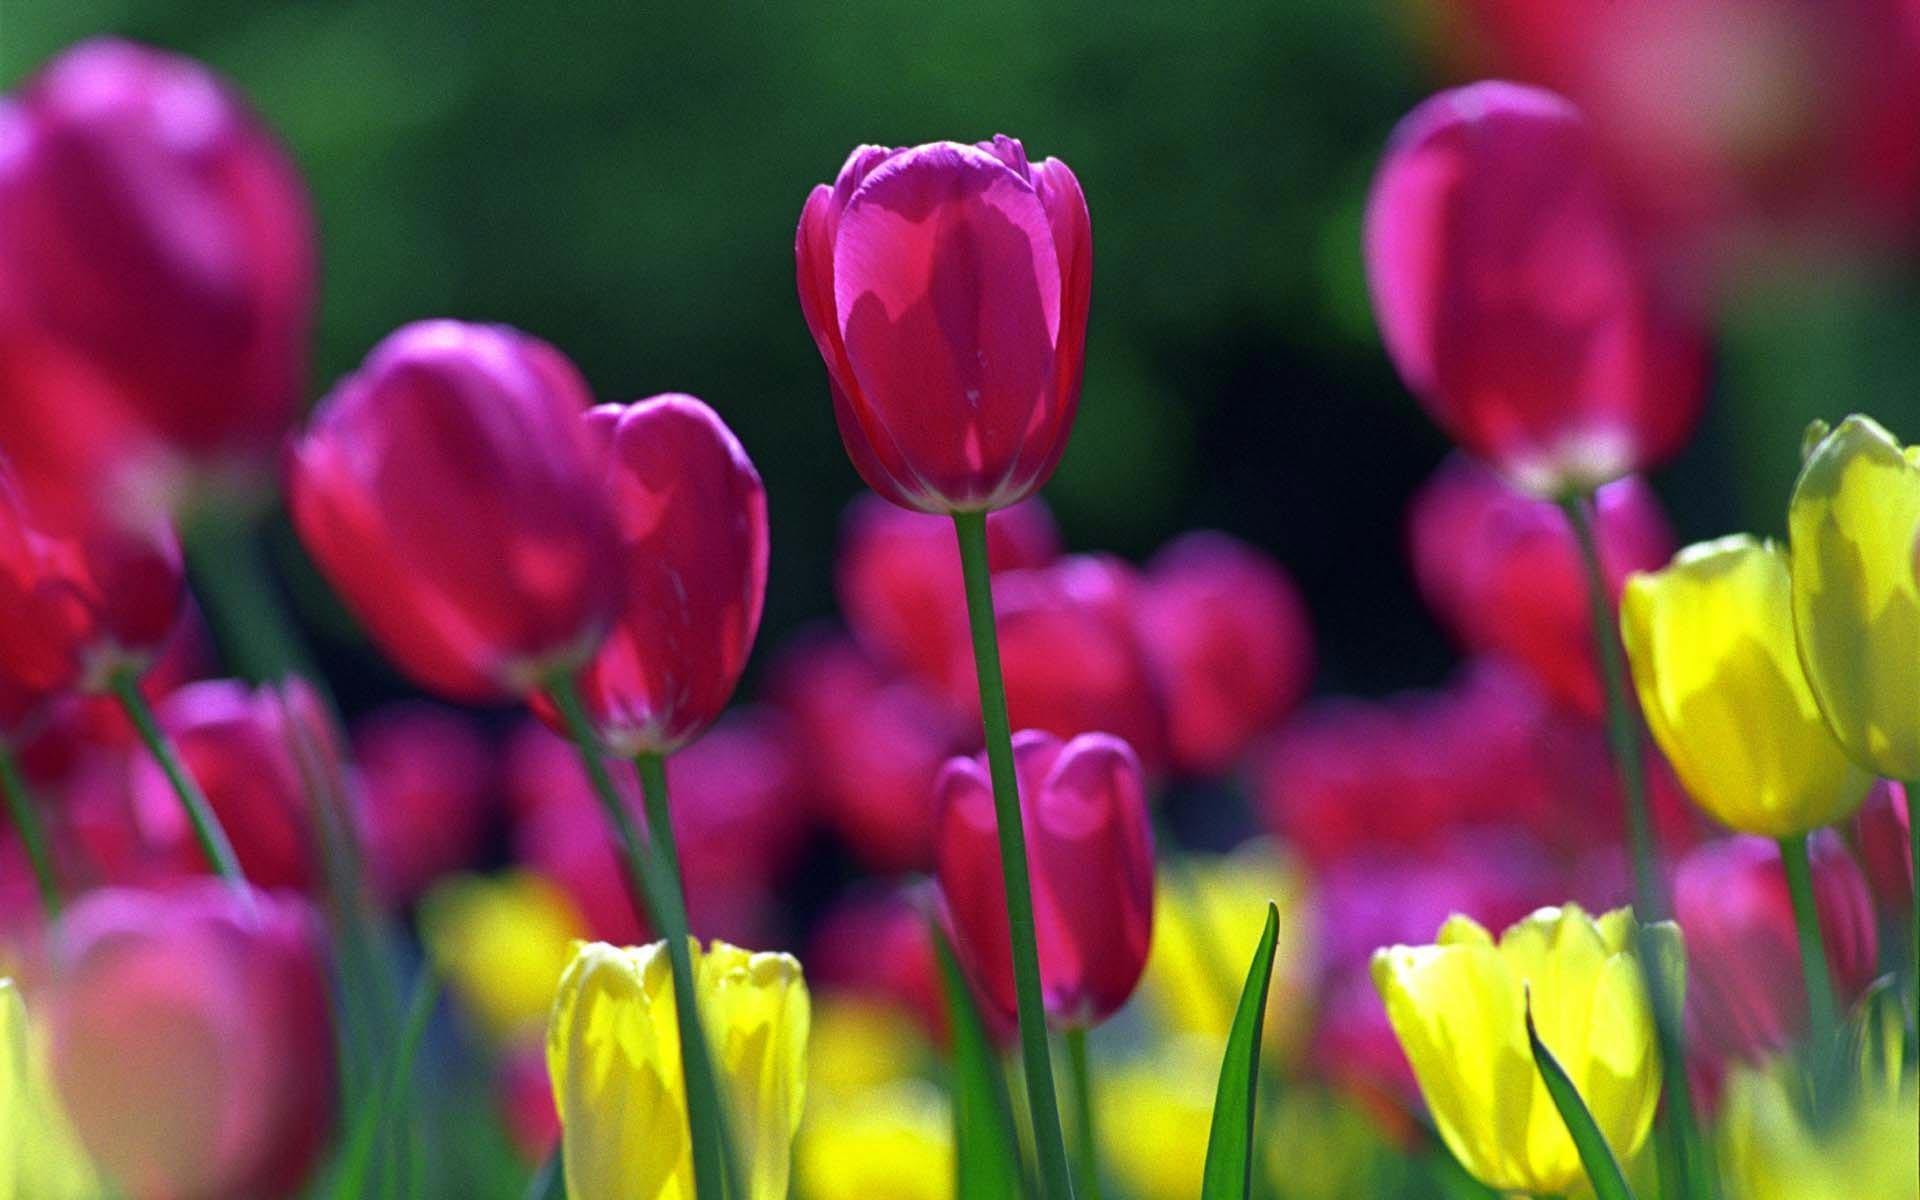 Tulips Wallpaper Background free Tulips computer bac